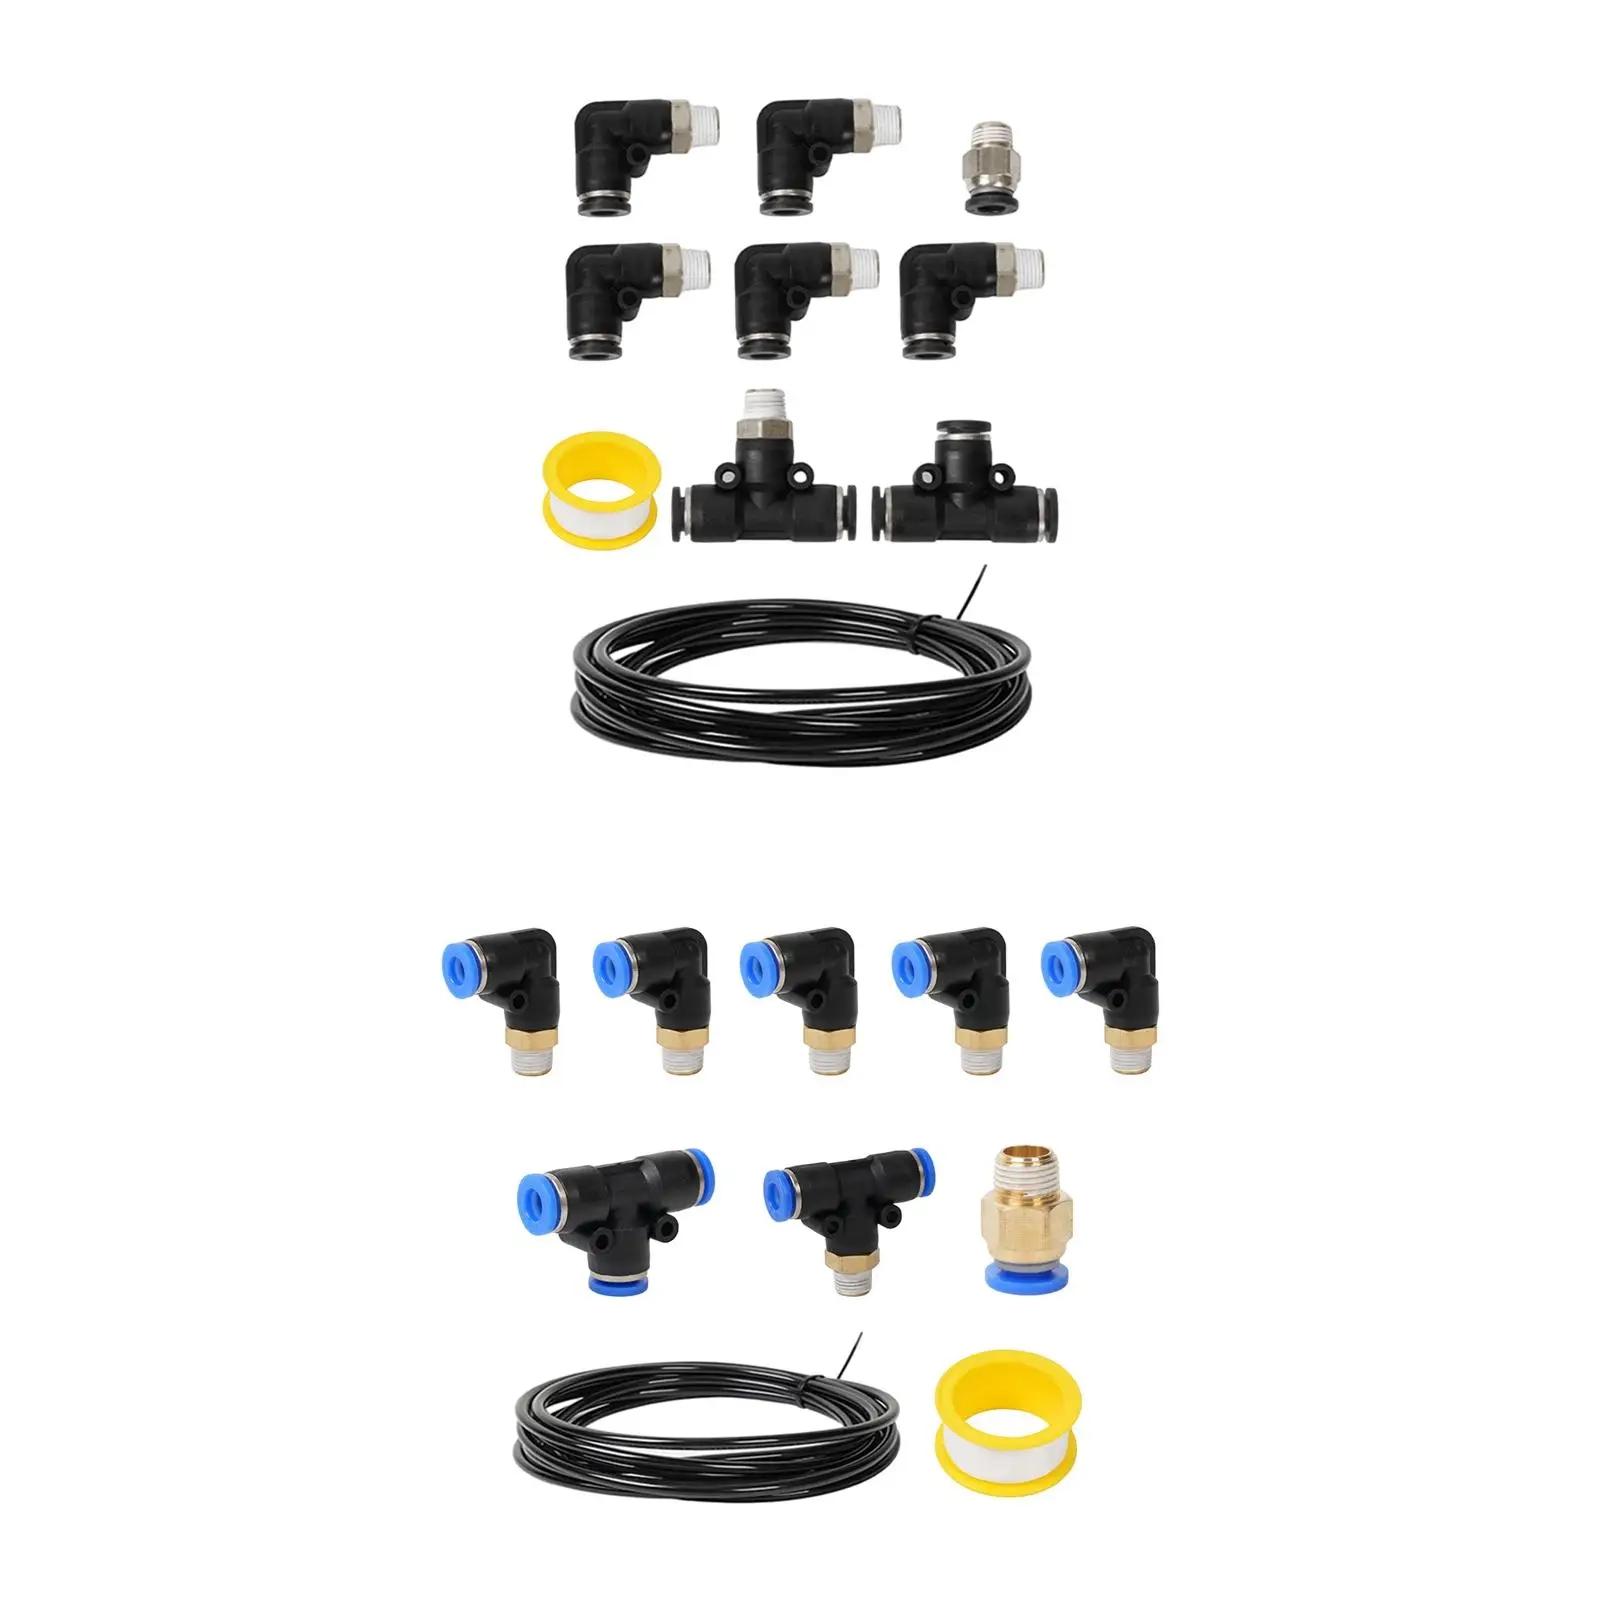 Wastegate Solenoid Connector Set Flexible Easy to Connect Assembly for Turbocharged Vehicle Durable Convenient Installation